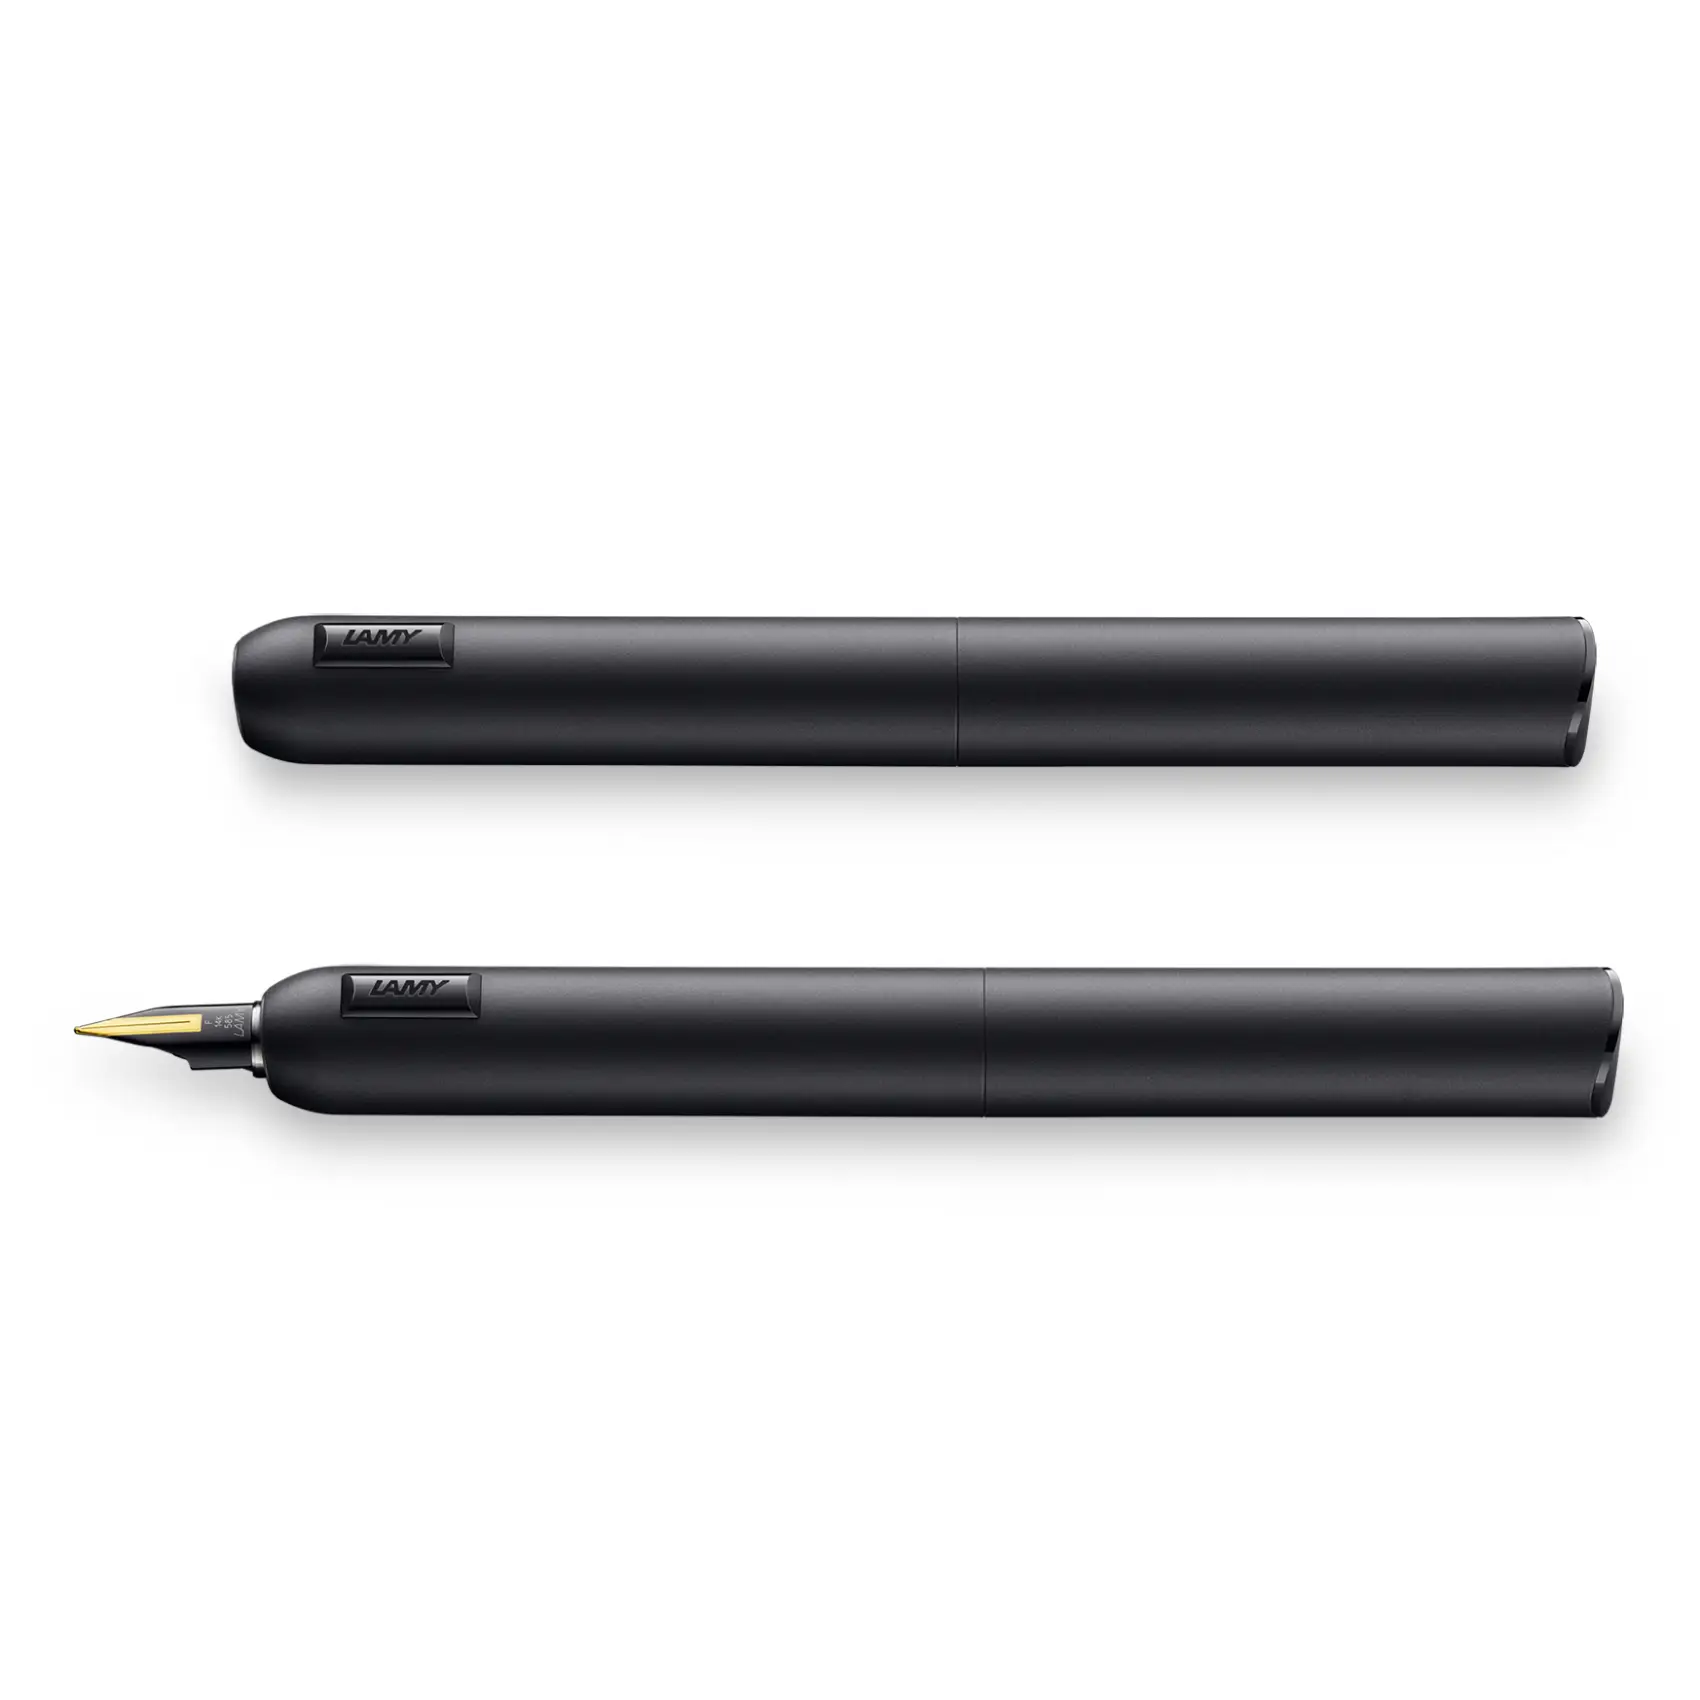 Product photo of the Lamy dialog cc All Black fountain pen, with the nib retracted and extended